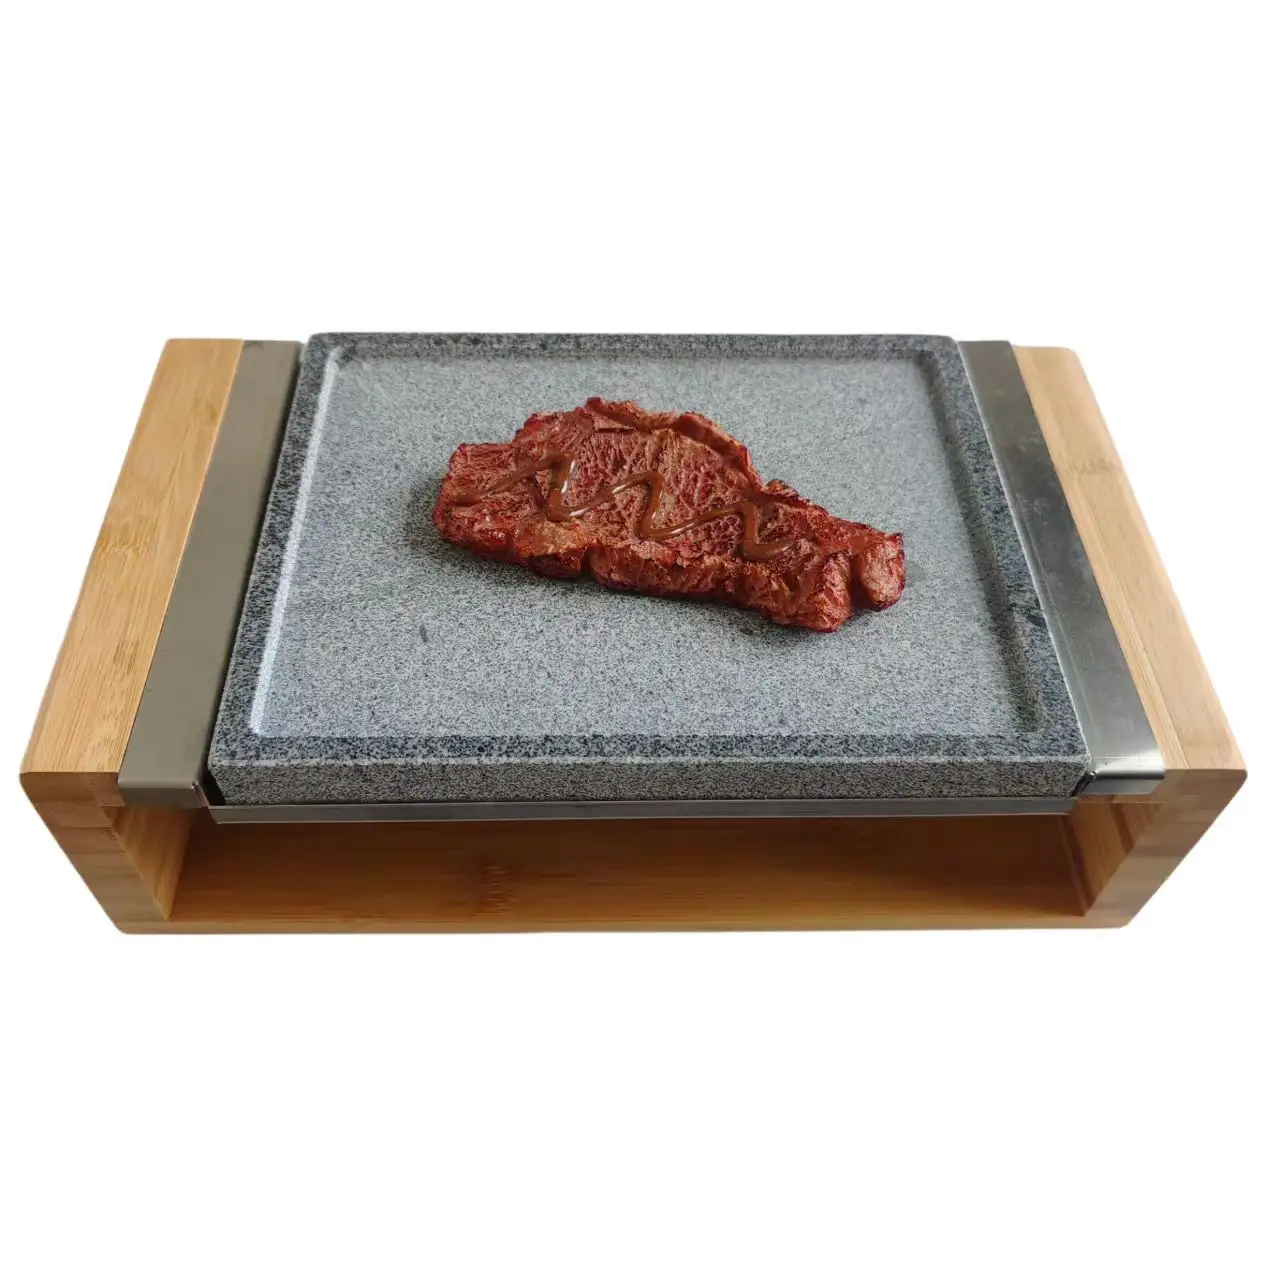 Wholesale Good Quality VOLCANIC LAVA PLATE for Beef Steak with stainless steel and Bamboo Tray Natural Environmentally Friendly